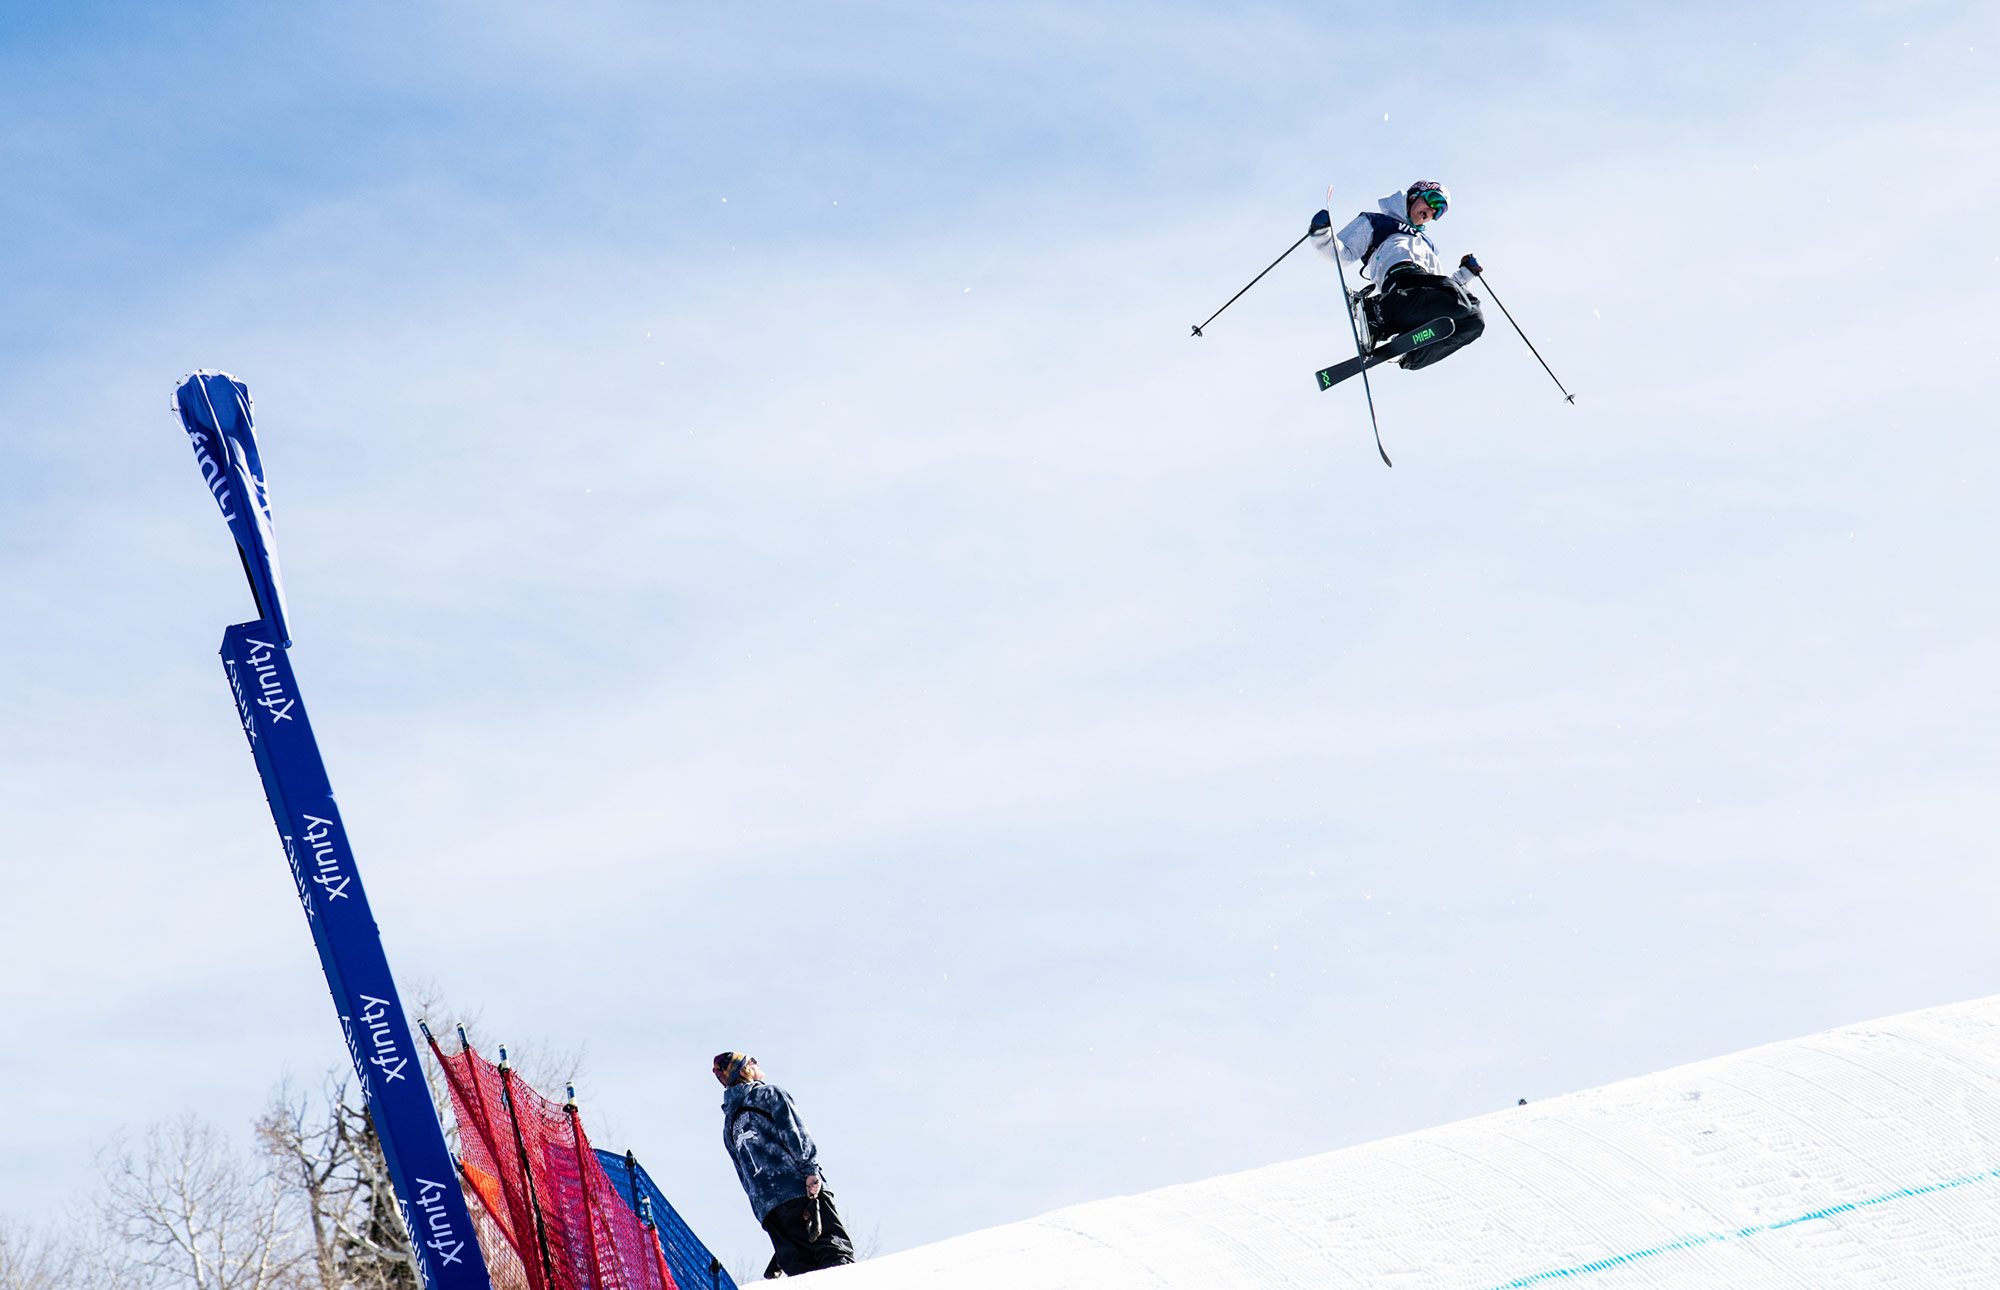 Hunter Henderson competes in men's freeski qualifications at the 2021 Visa Big Air in Steamboat, Colorado.